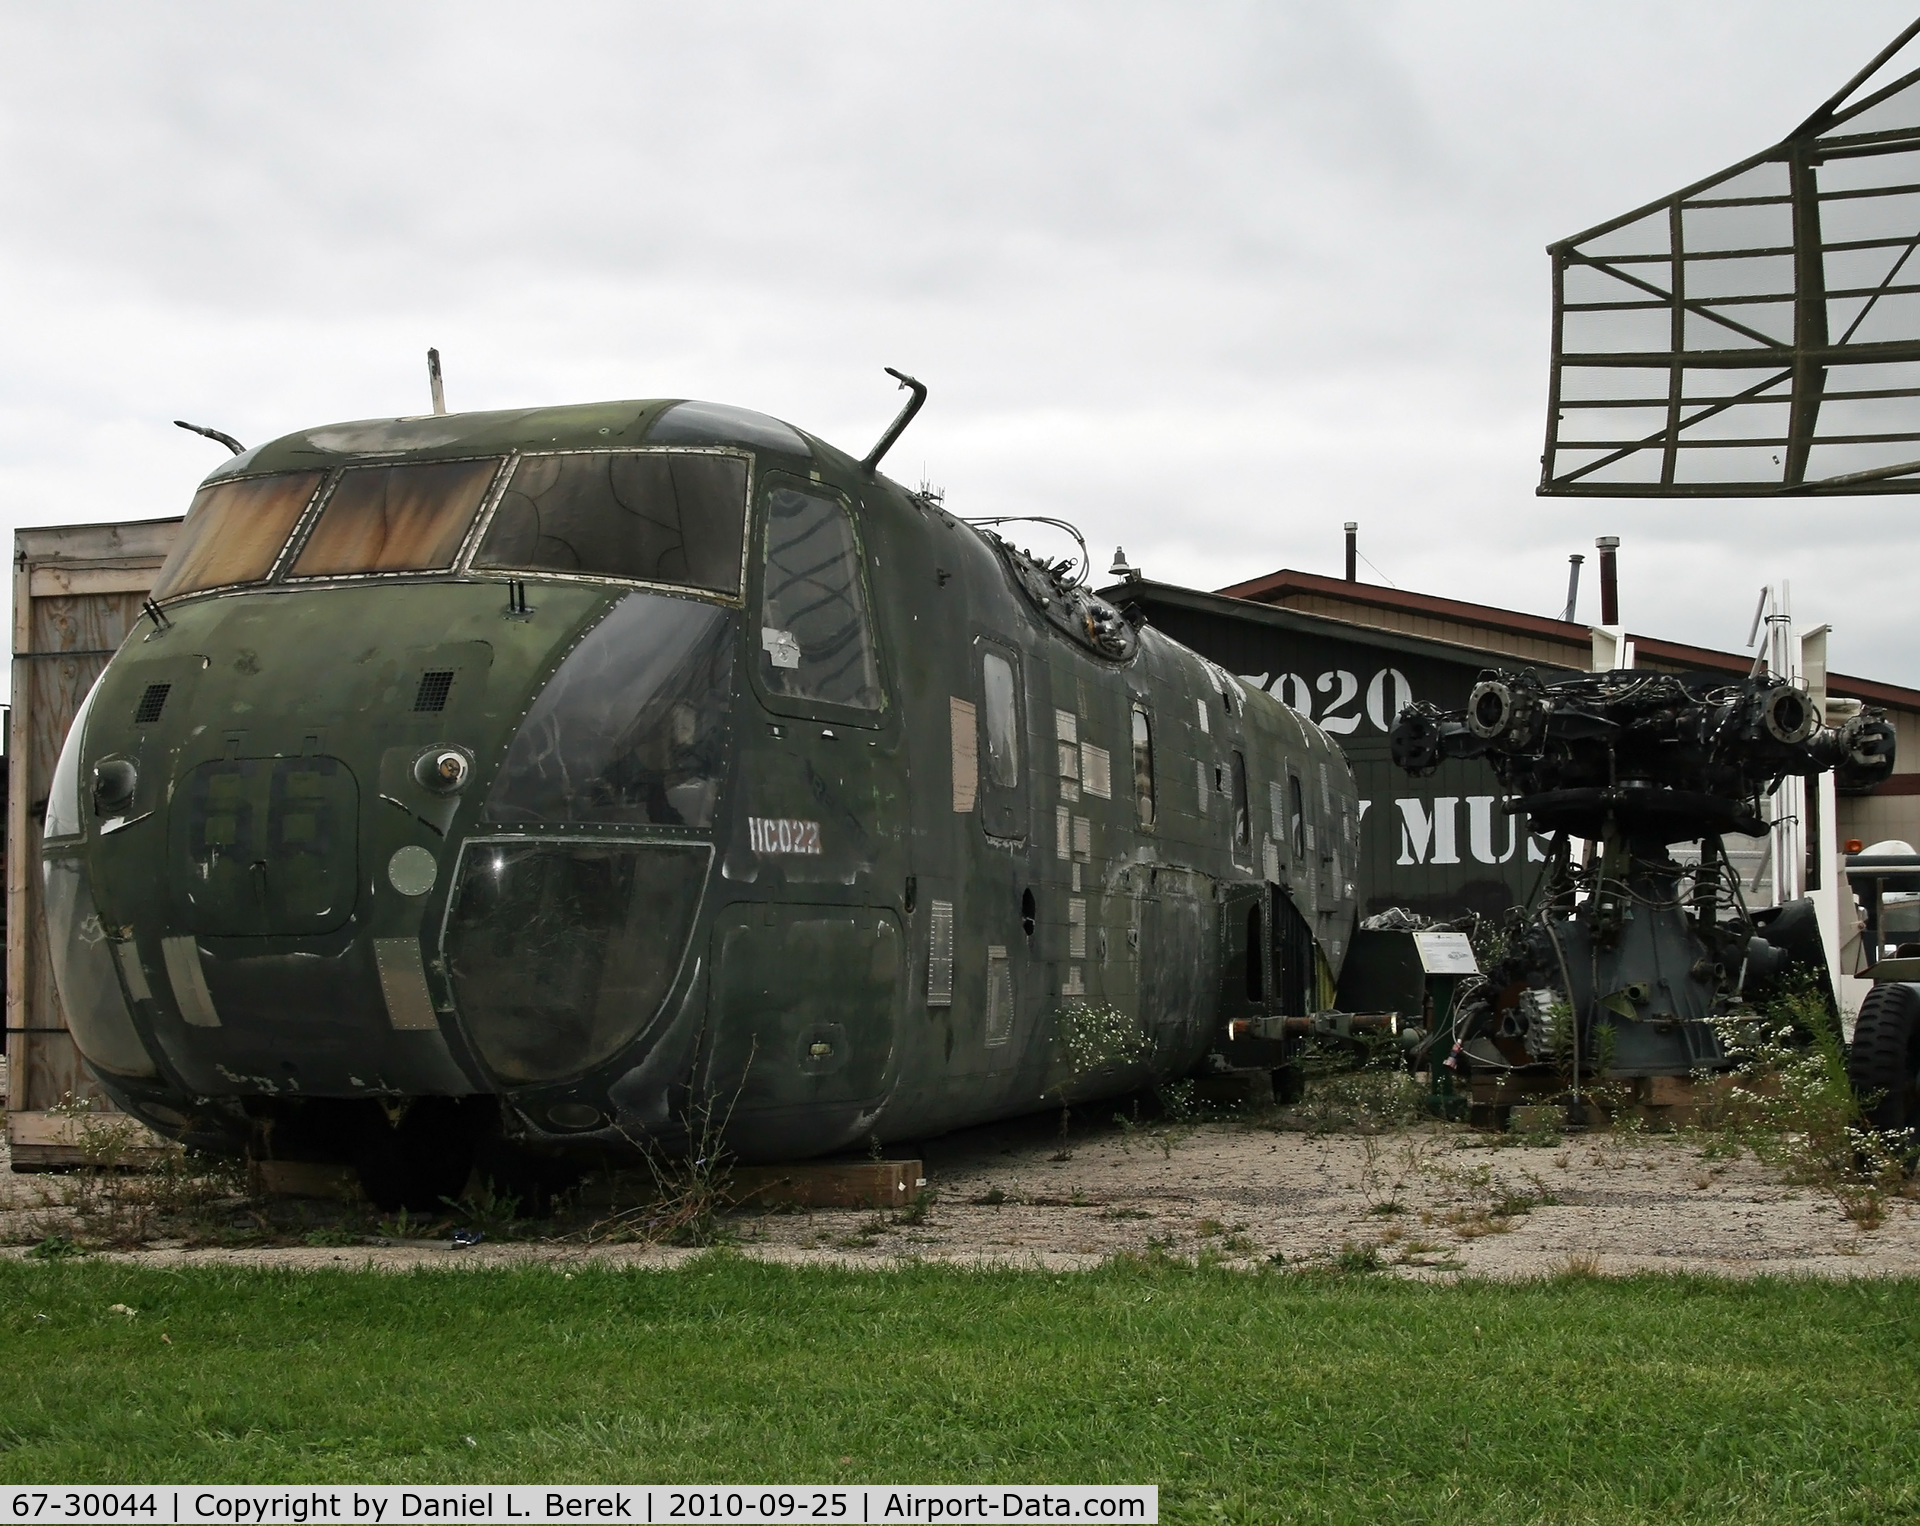 67-30044, 1967 Sikorsky CH-53A Sea Stallion C/N 65-061, Remains of old heli on display at the Russell Military Museum